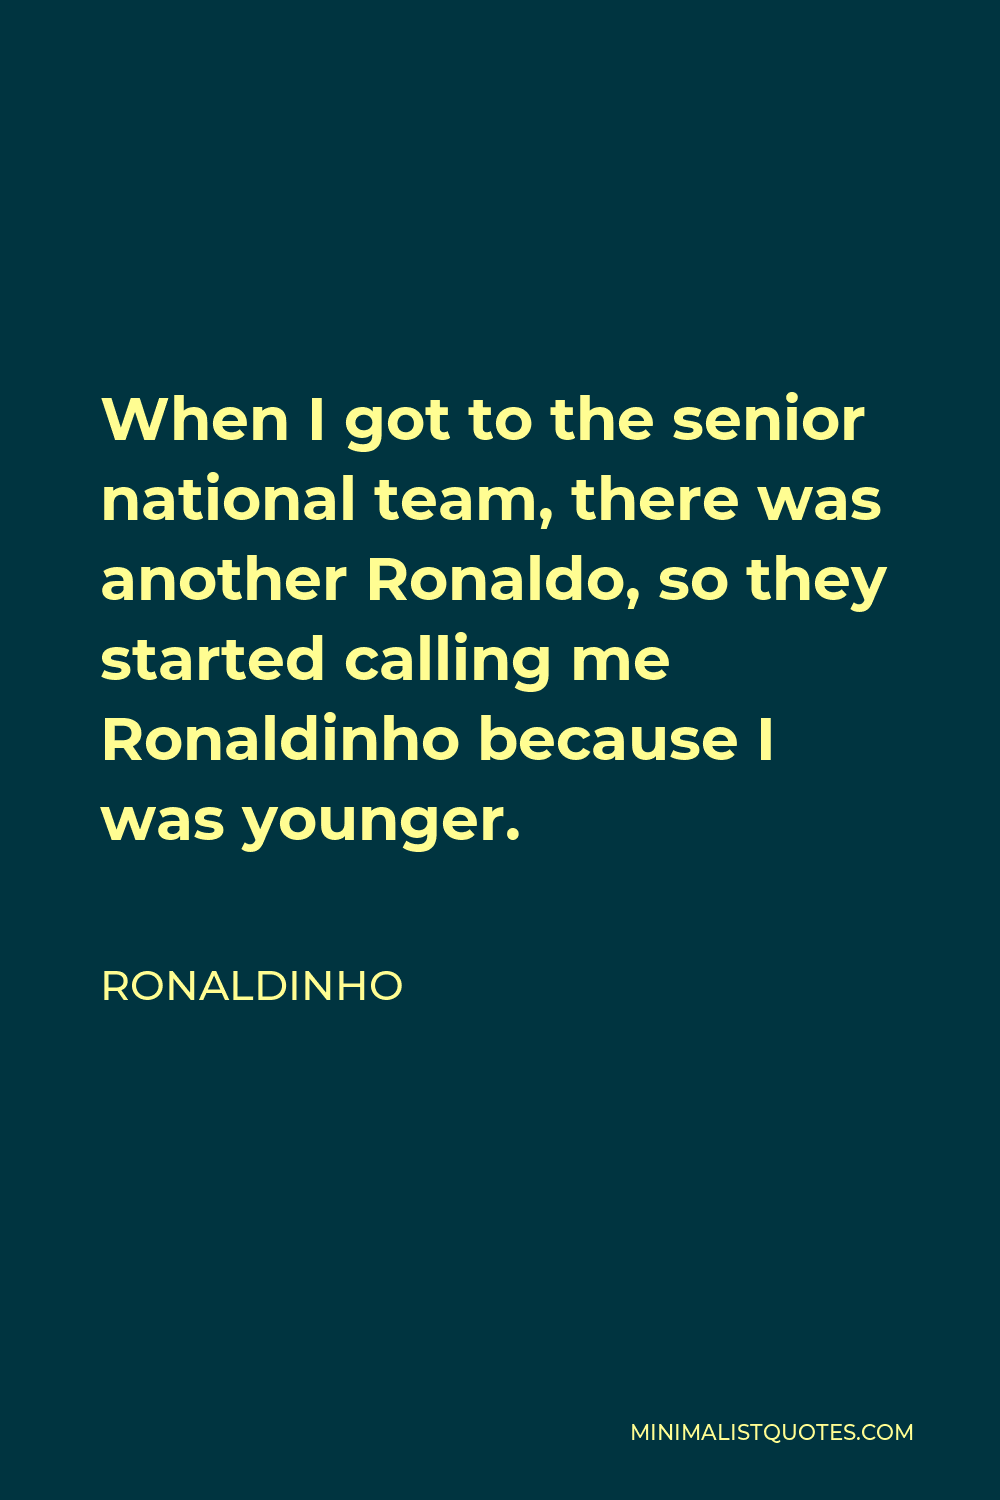 Ronaldinho Quote - When I got to the senior national team, there was another Ronaldo, so they started calling me Ronaldinho because I was younger.